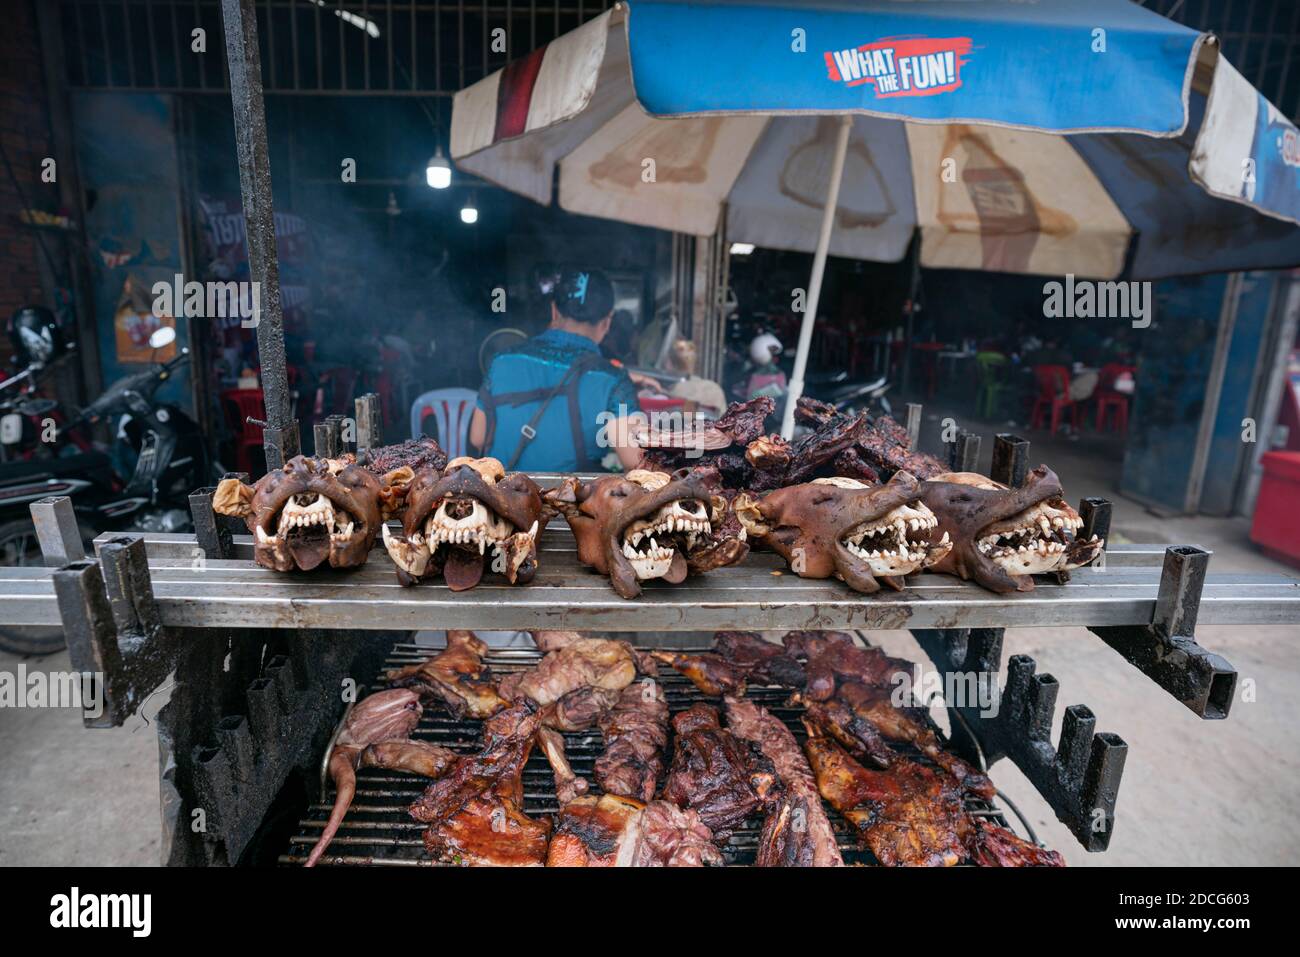 Svay Rieng, Cambodia. 14th June, 2020. Dog meat is seen displayed on a grill for sale at a restaurant.An estimated 800 people a year die of rabies in Cambodia, one of the highest deaths rates per capita in the world. At the root of Cambodia's endemic are unvaccinated dogs, in a country with one of the highest dog to human ratios in the world. Efforts at achieving herd immunity are significantly disrupted by the 3 million dogs per year slaughtered for Cambodia's dog meat trade. Some experts have warned that unless the dog meat trade is addressed, rabies will still remain prevalent. (Credit I Stock Photo